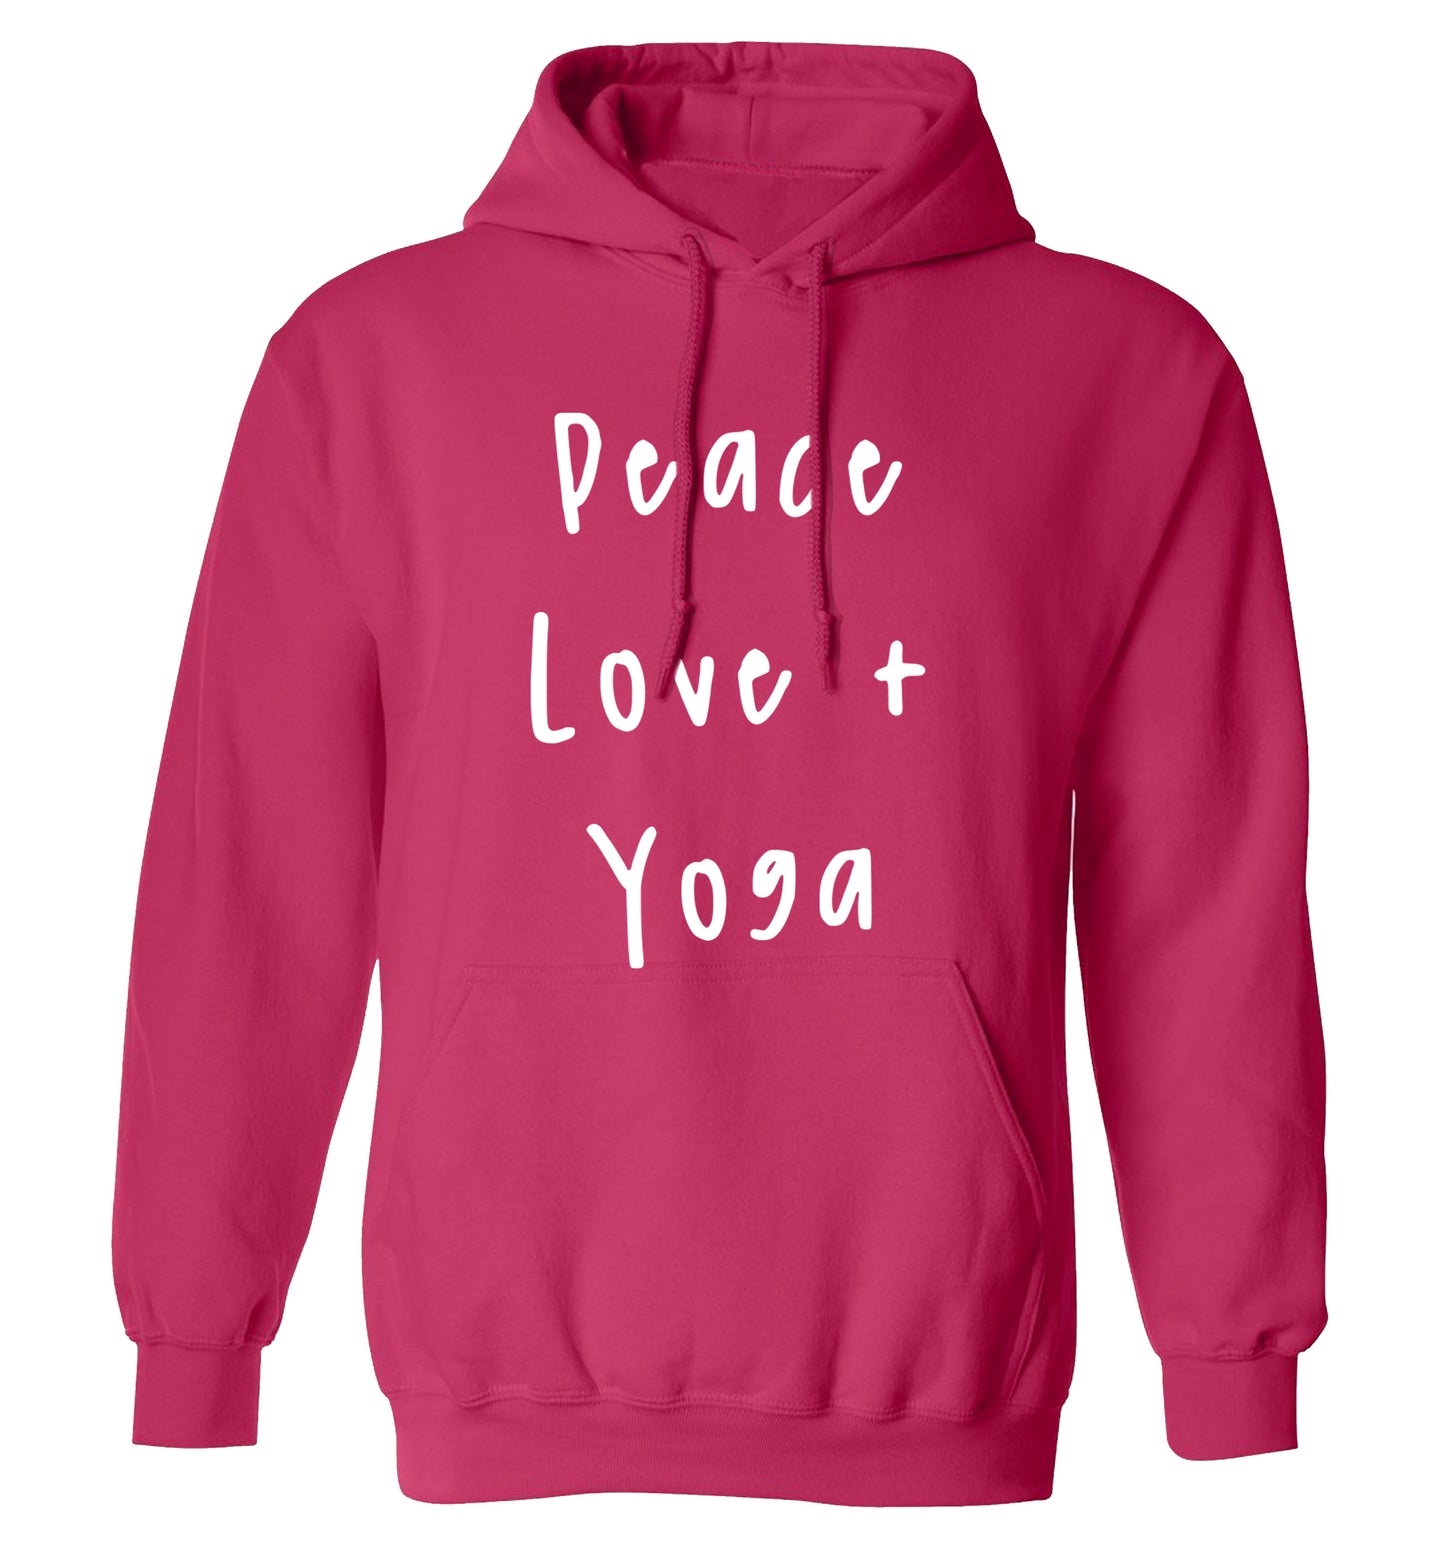 Peace love and yoga adults unisex pink hoodie 2XL